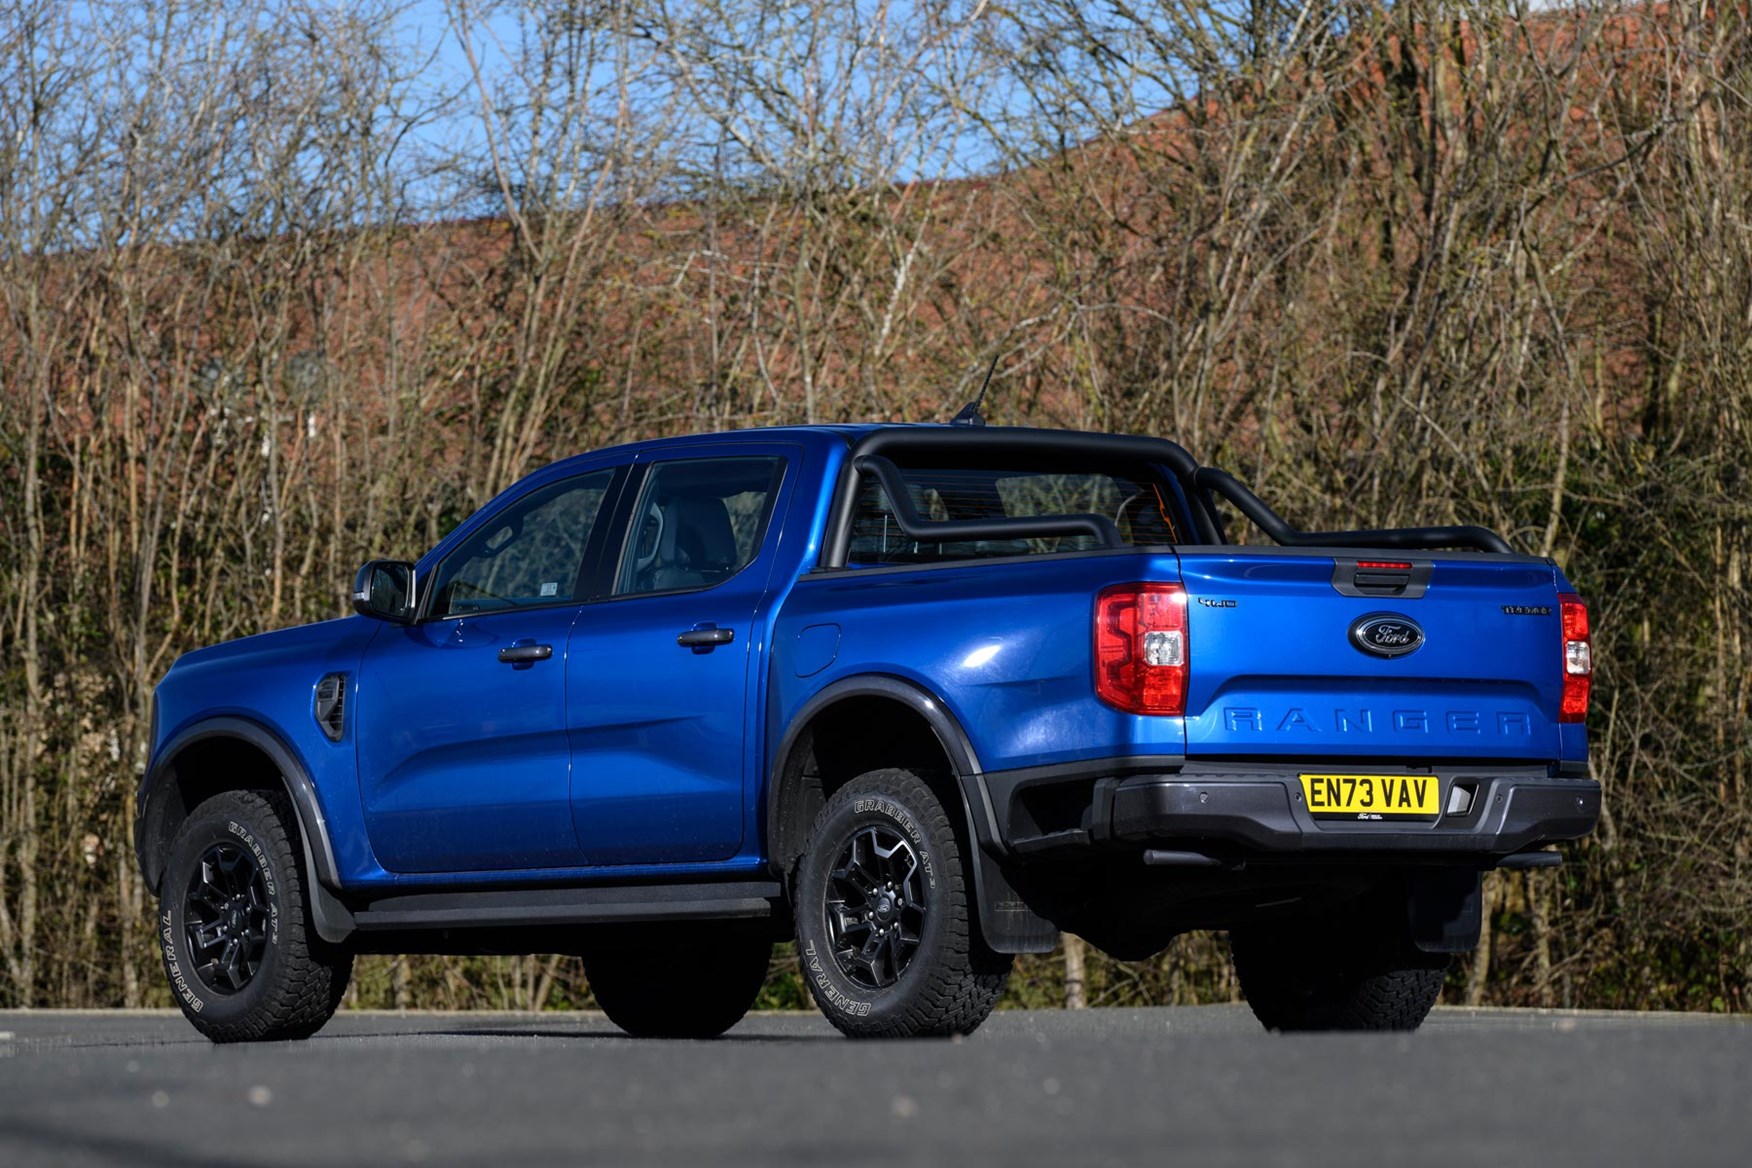 The Ford Ranger is available in a huge array of versions.